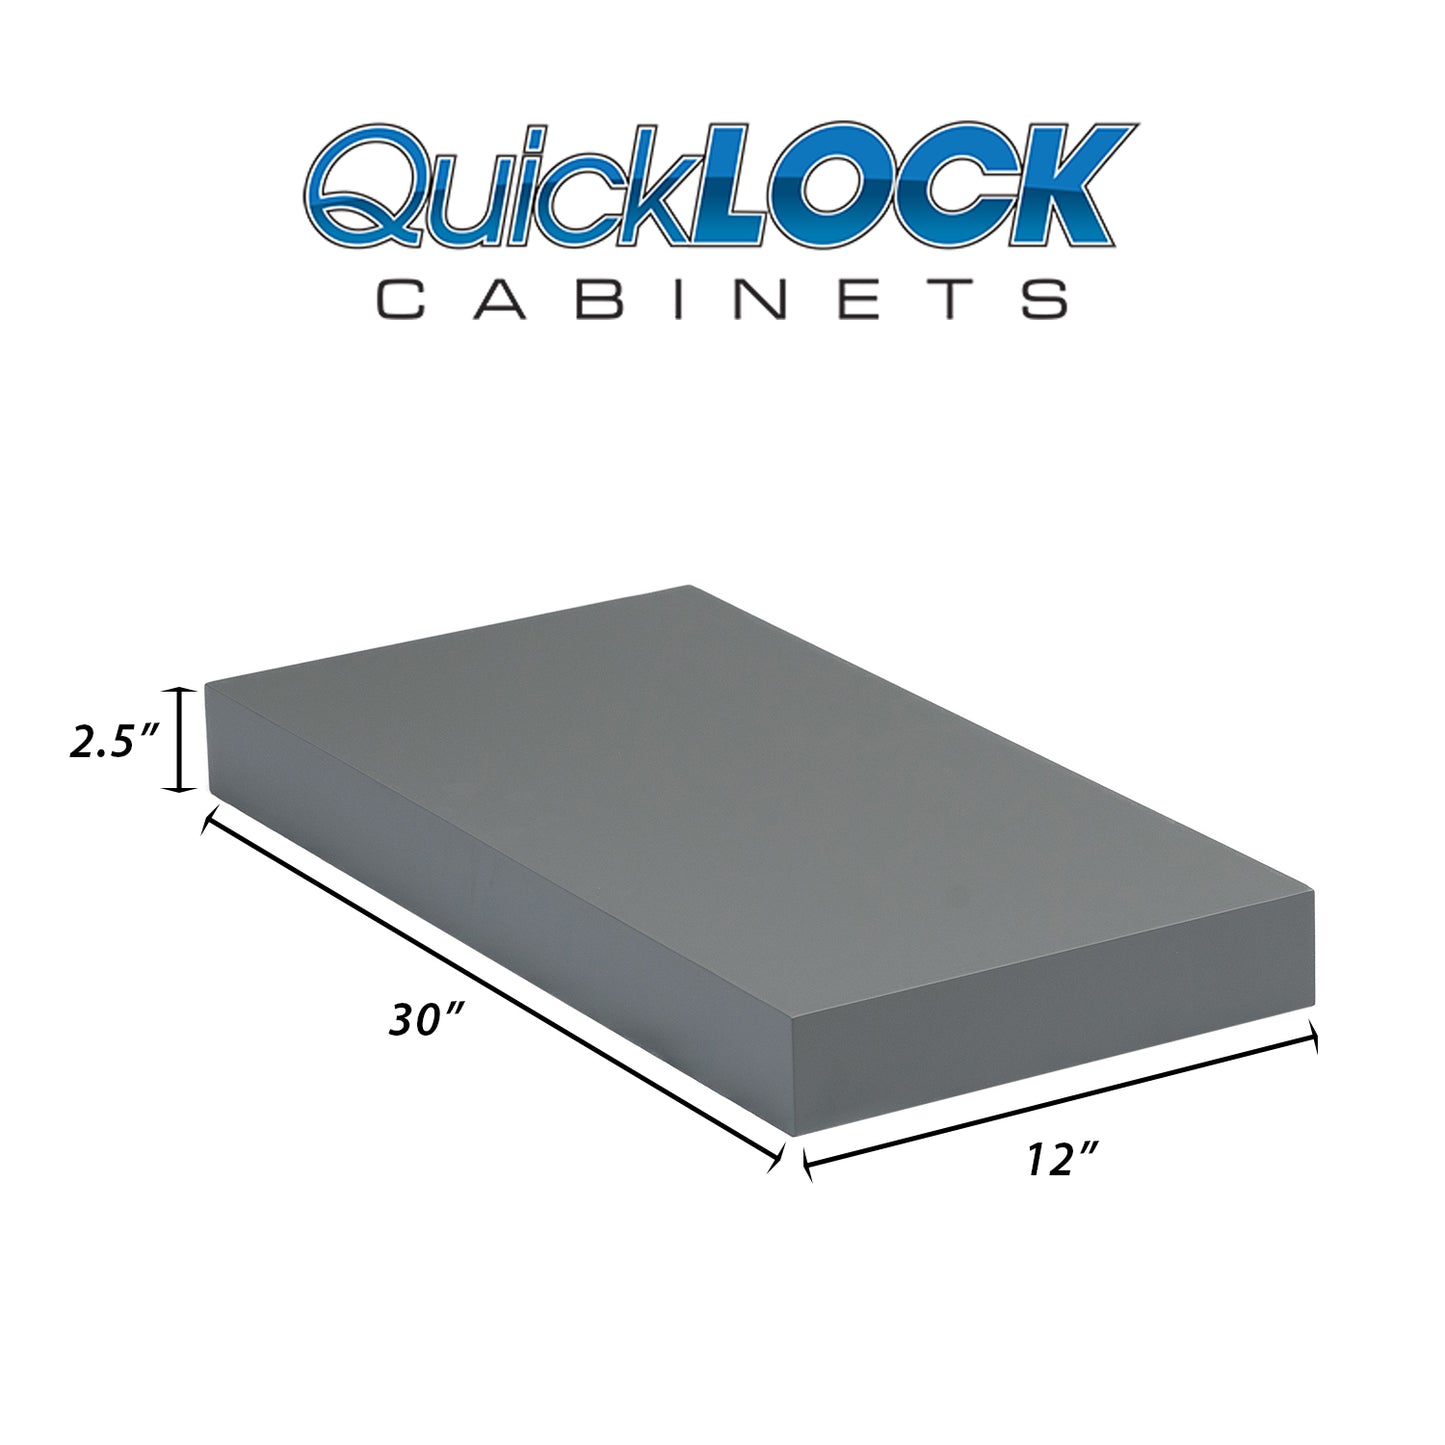 Quicklock Cabinets Floating Shelves | 2.5" Thick | Magnetic Grey, 12" D x 30" W x 2.5" H | American Made | Hardwood Bracket | Complete Shelf Unit